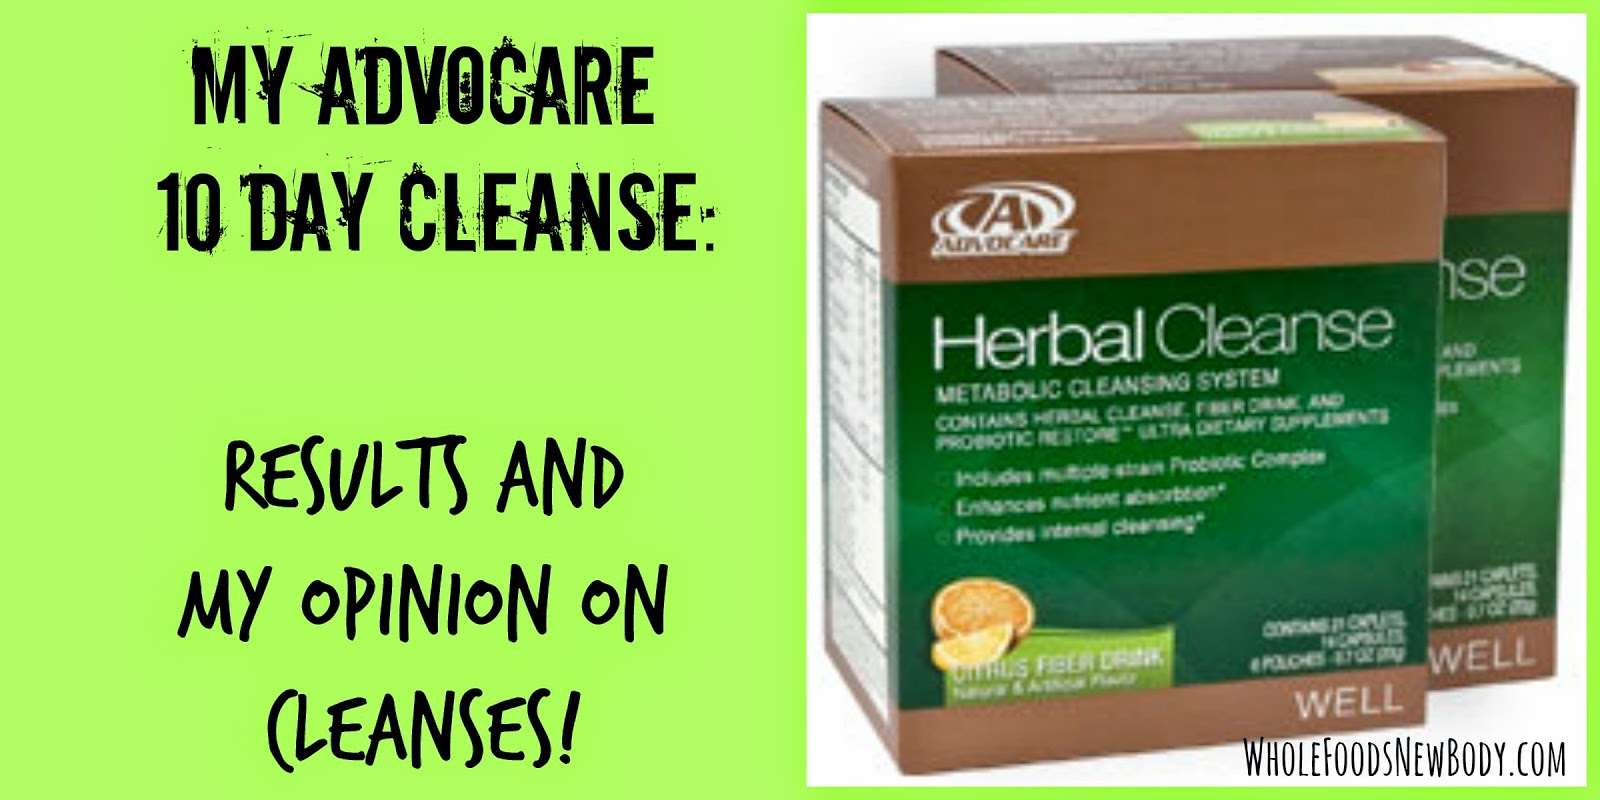 10 day Advocare Cleanse. 